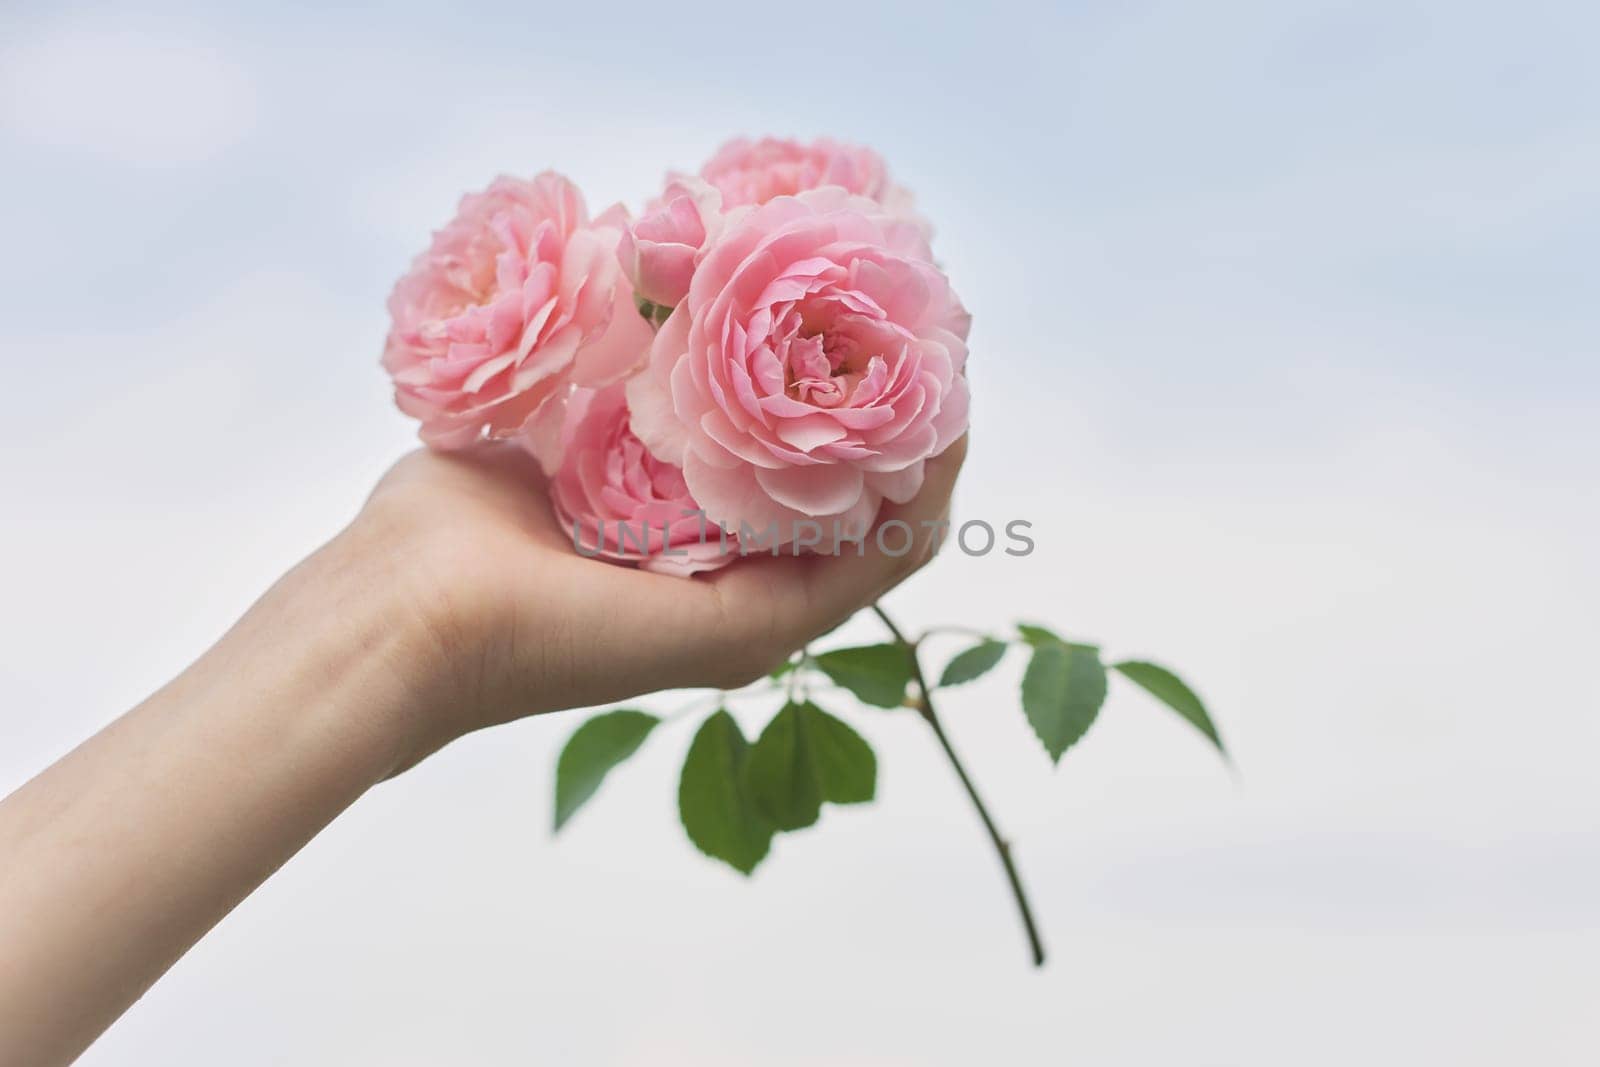 Female hand holding pink rose flower, background blue clear sky in clouds, copy space. Beauty, natural floral and herbal cosmetics and perfumes